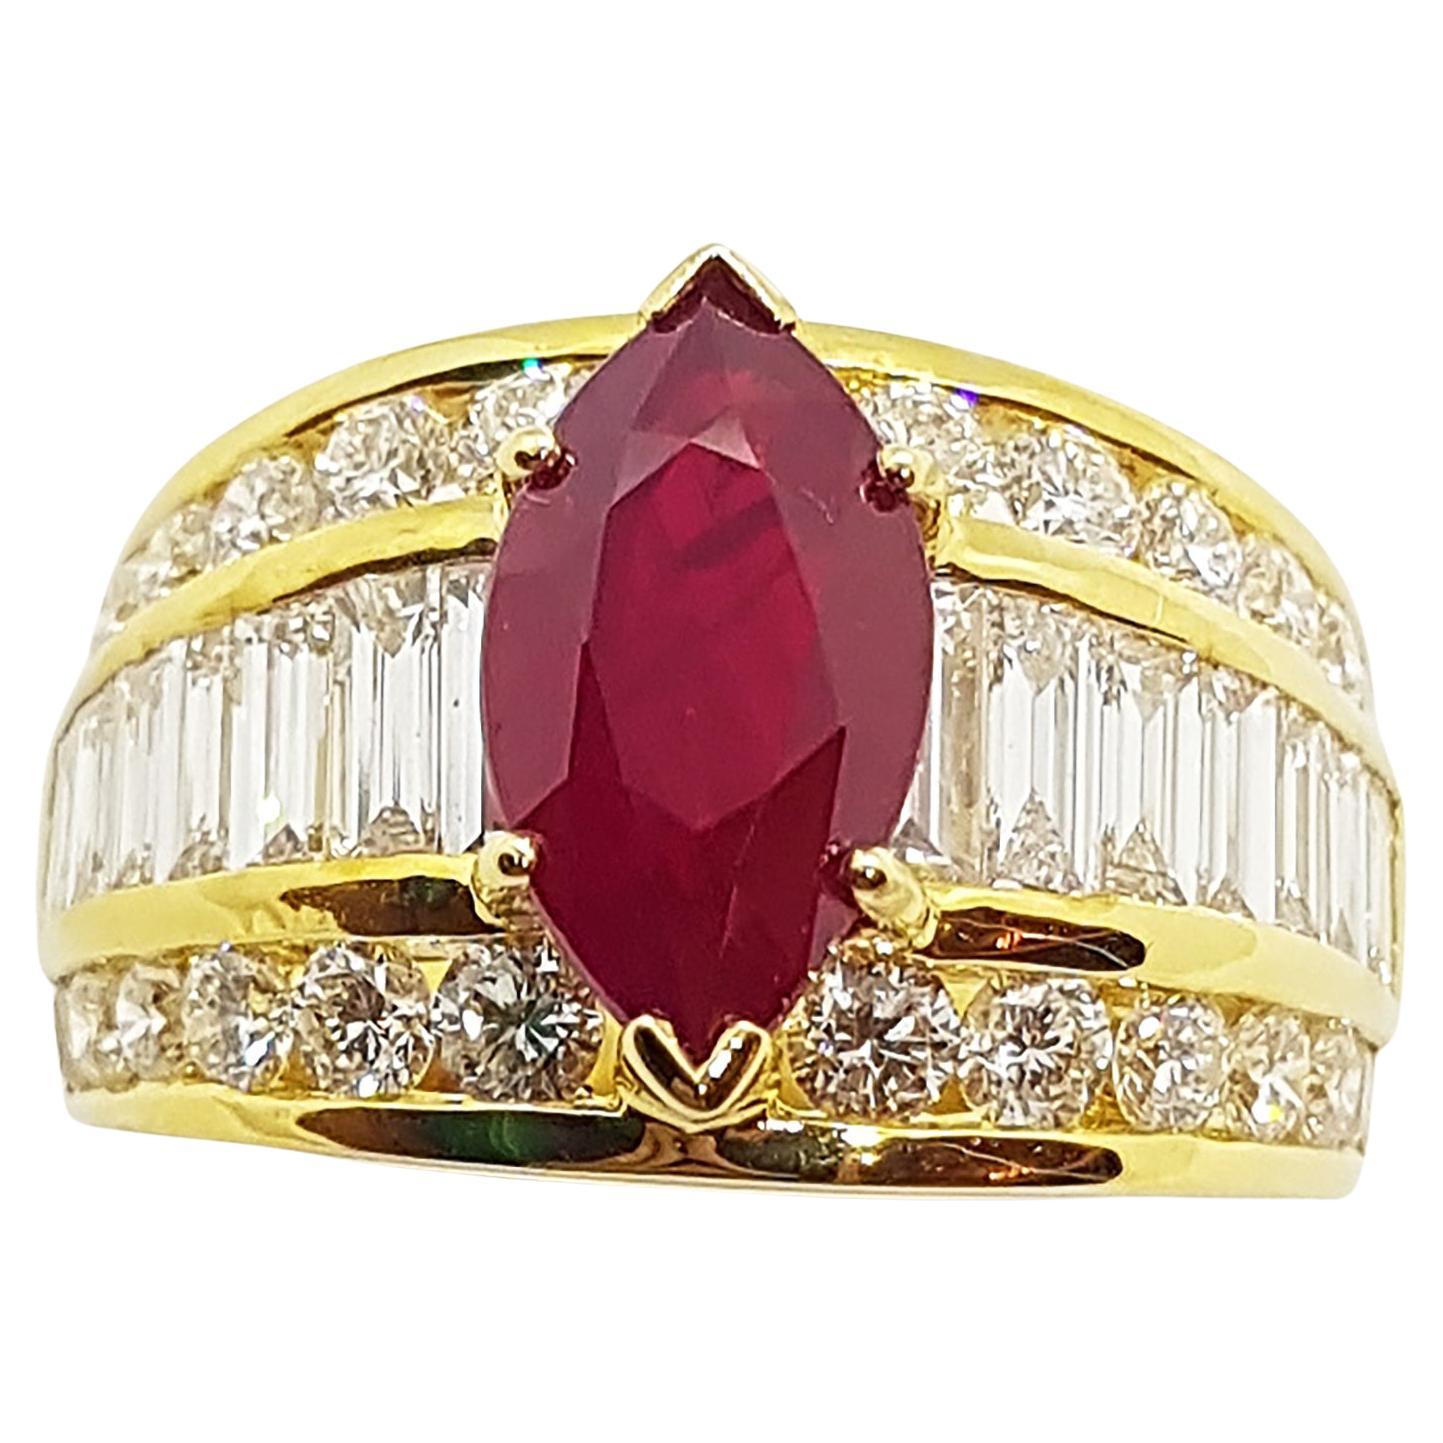 Ruby 2.71 Carats with Diamond 2.59 Carats Ring Set in 18 Karat Gold Settings